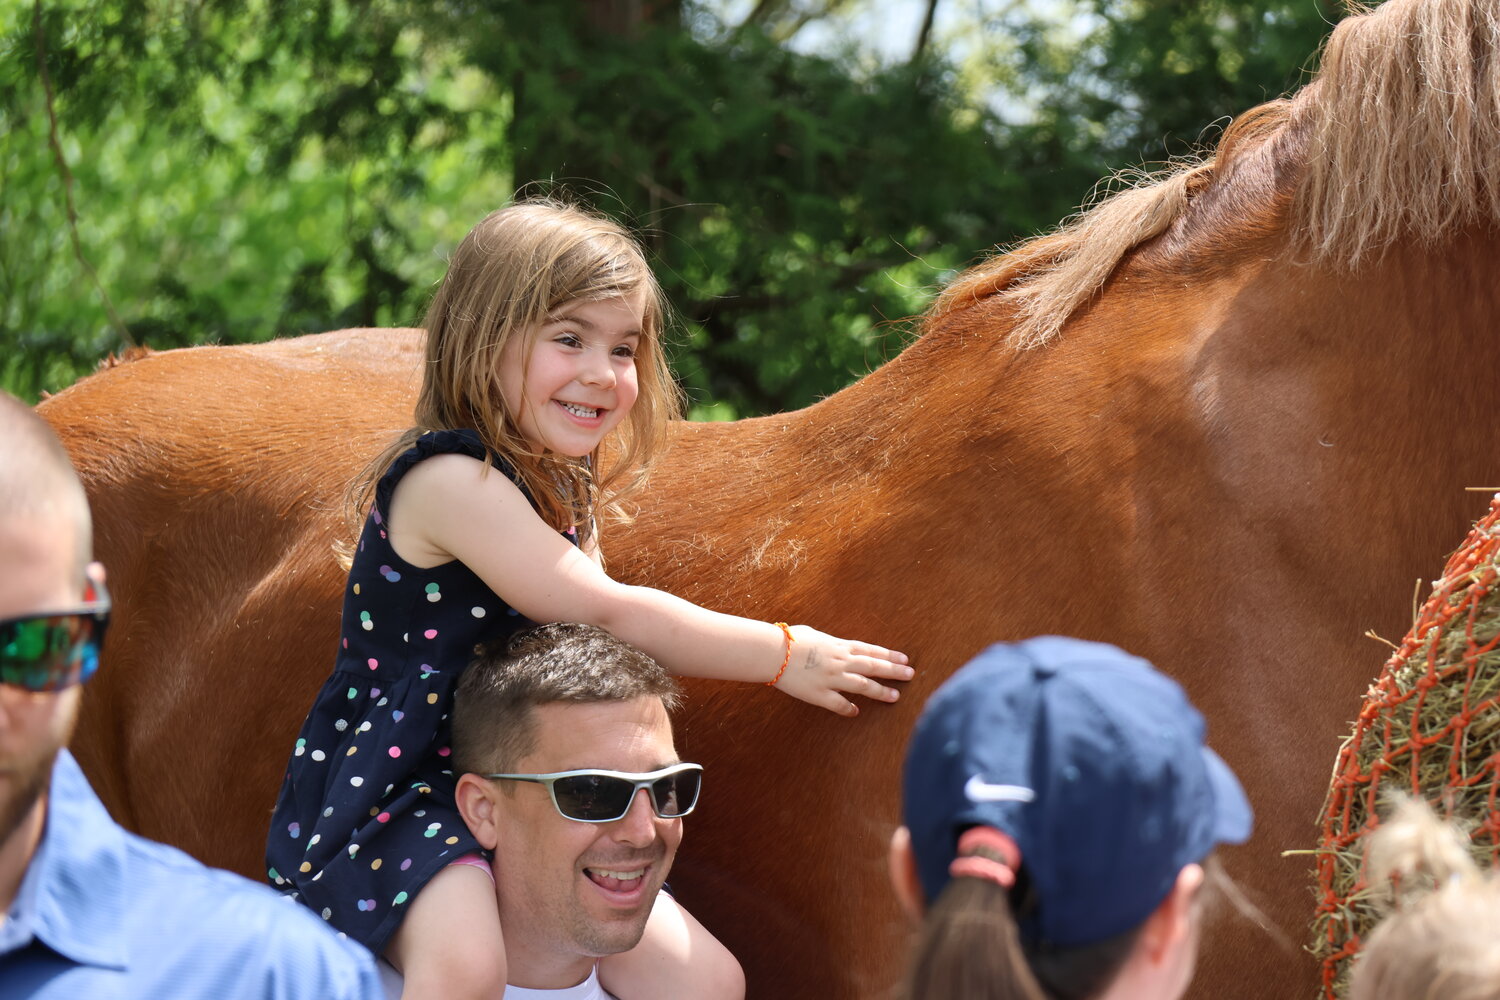 Delaware Valley University's A-Day celebration last weekend featured attractions for all ages.